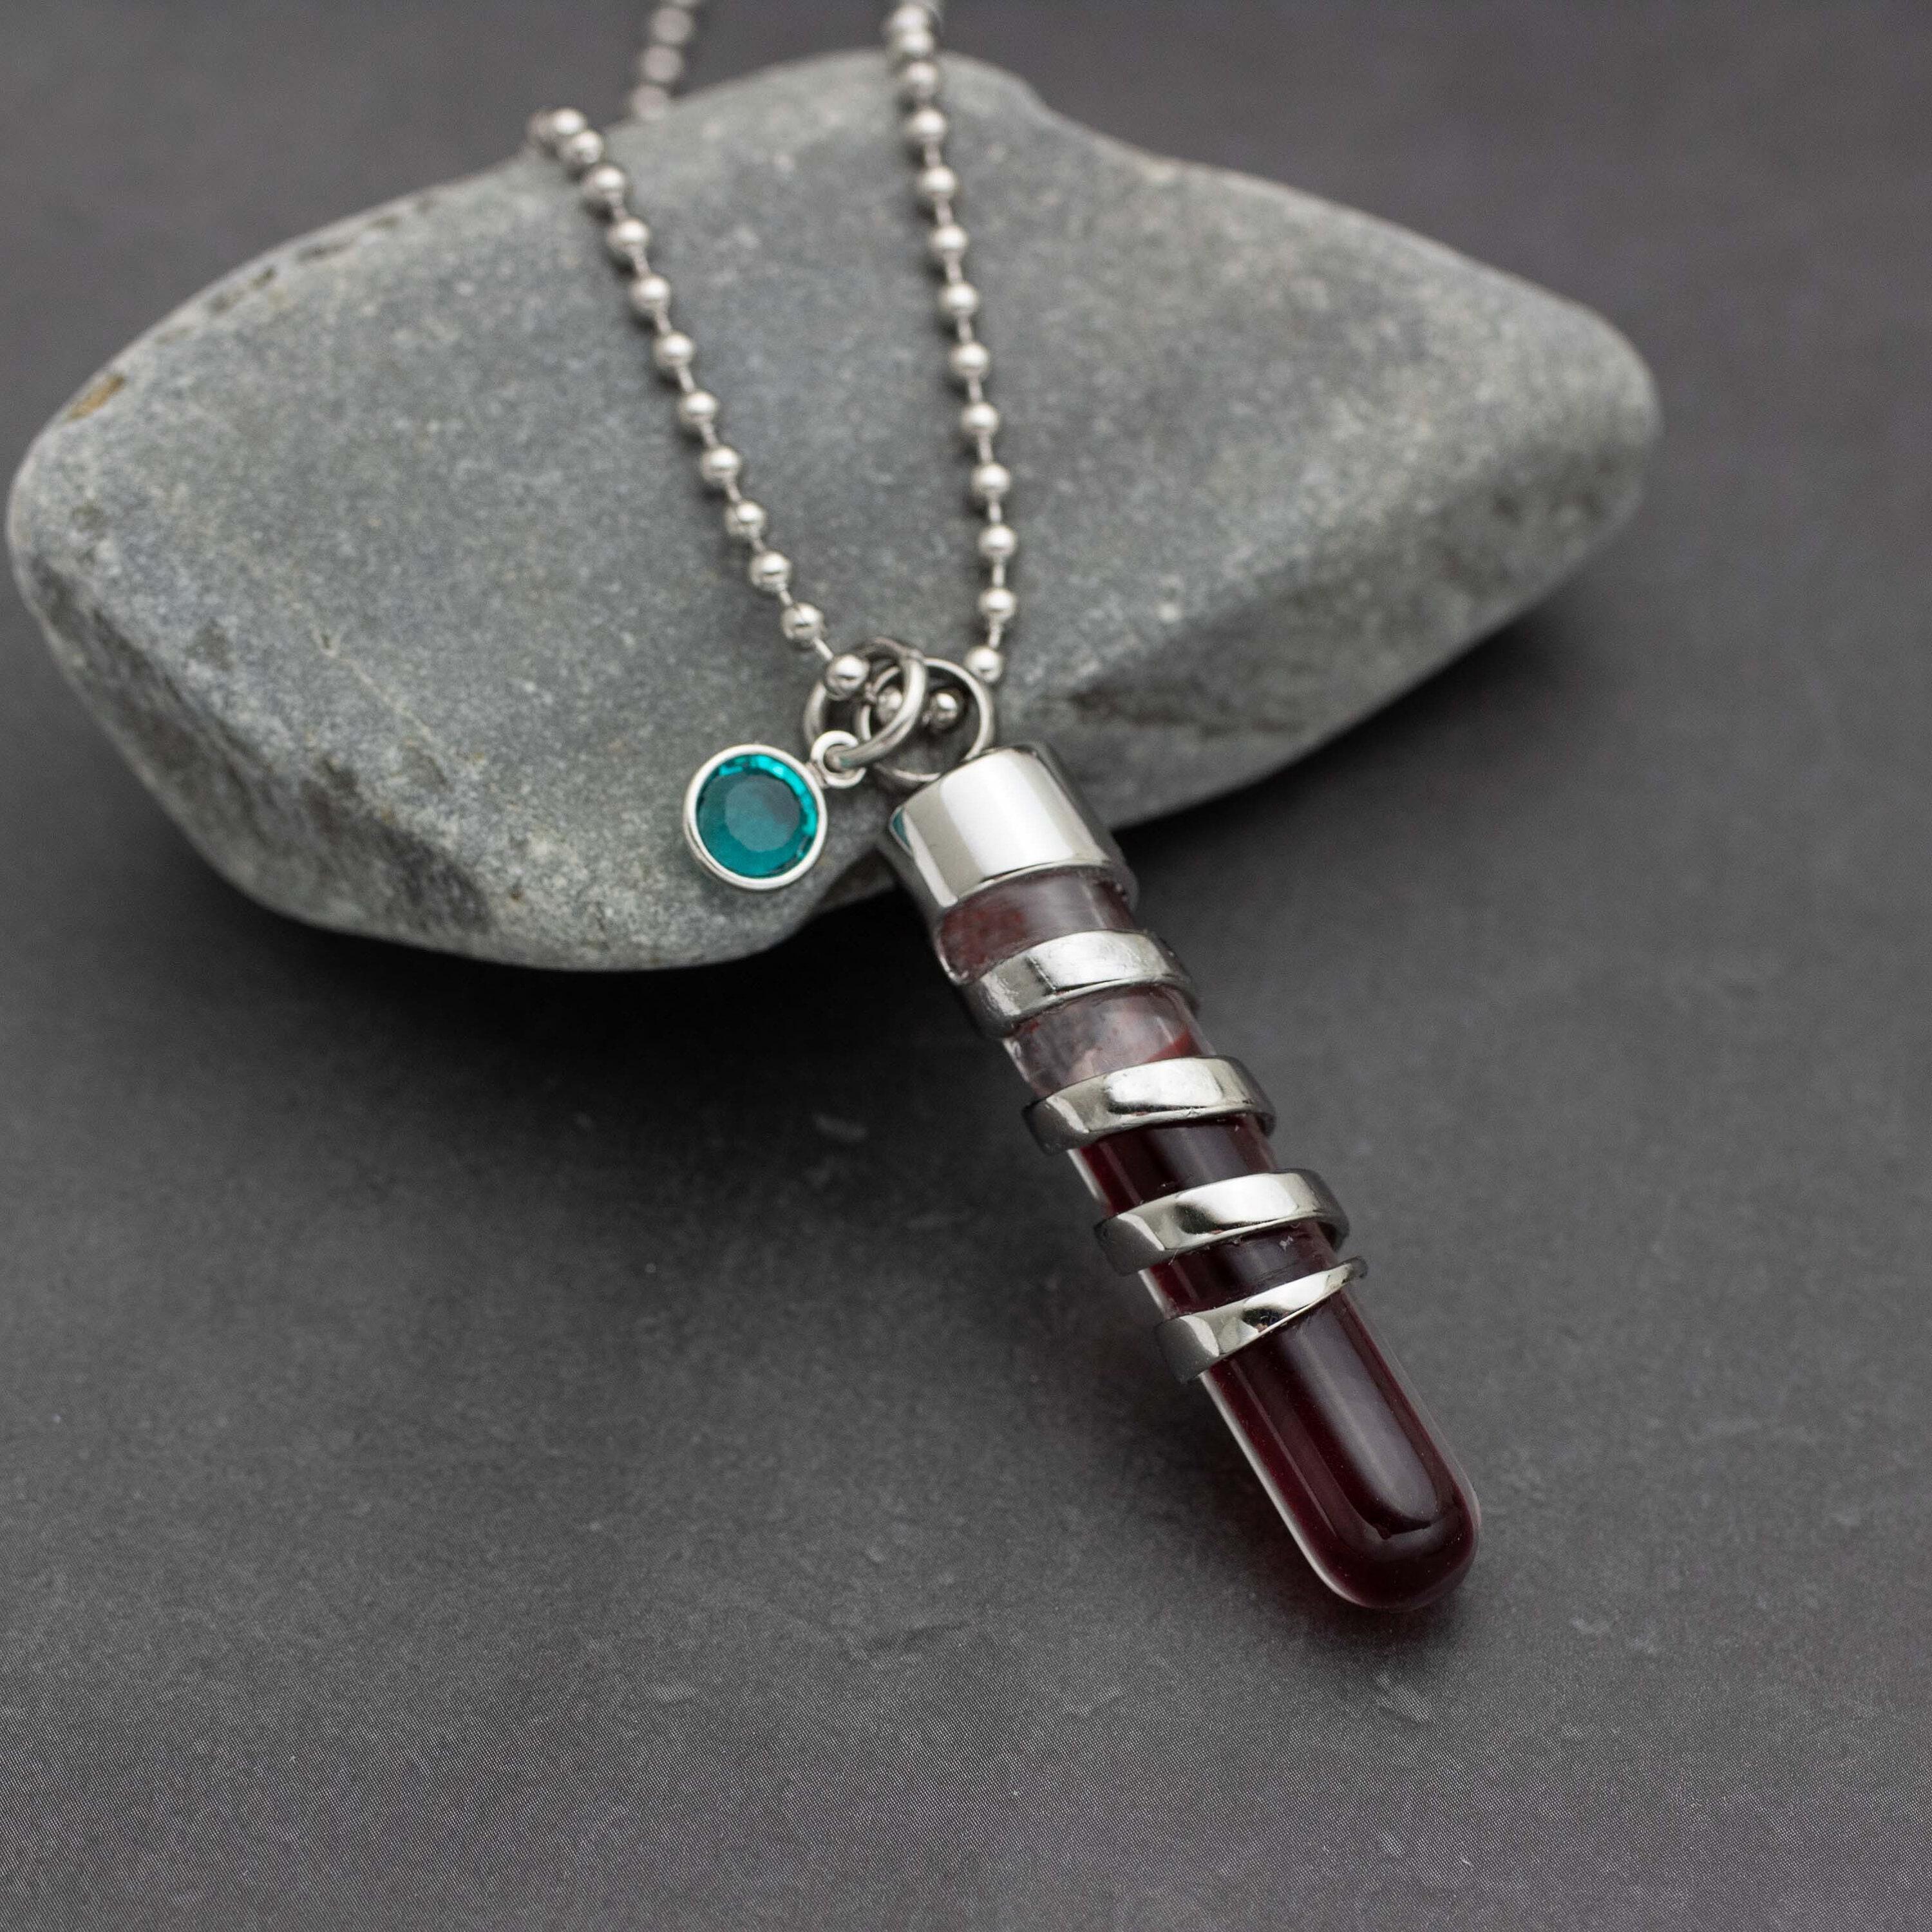 Buy Blood Vial Potion Pendant Online in India - Etsy